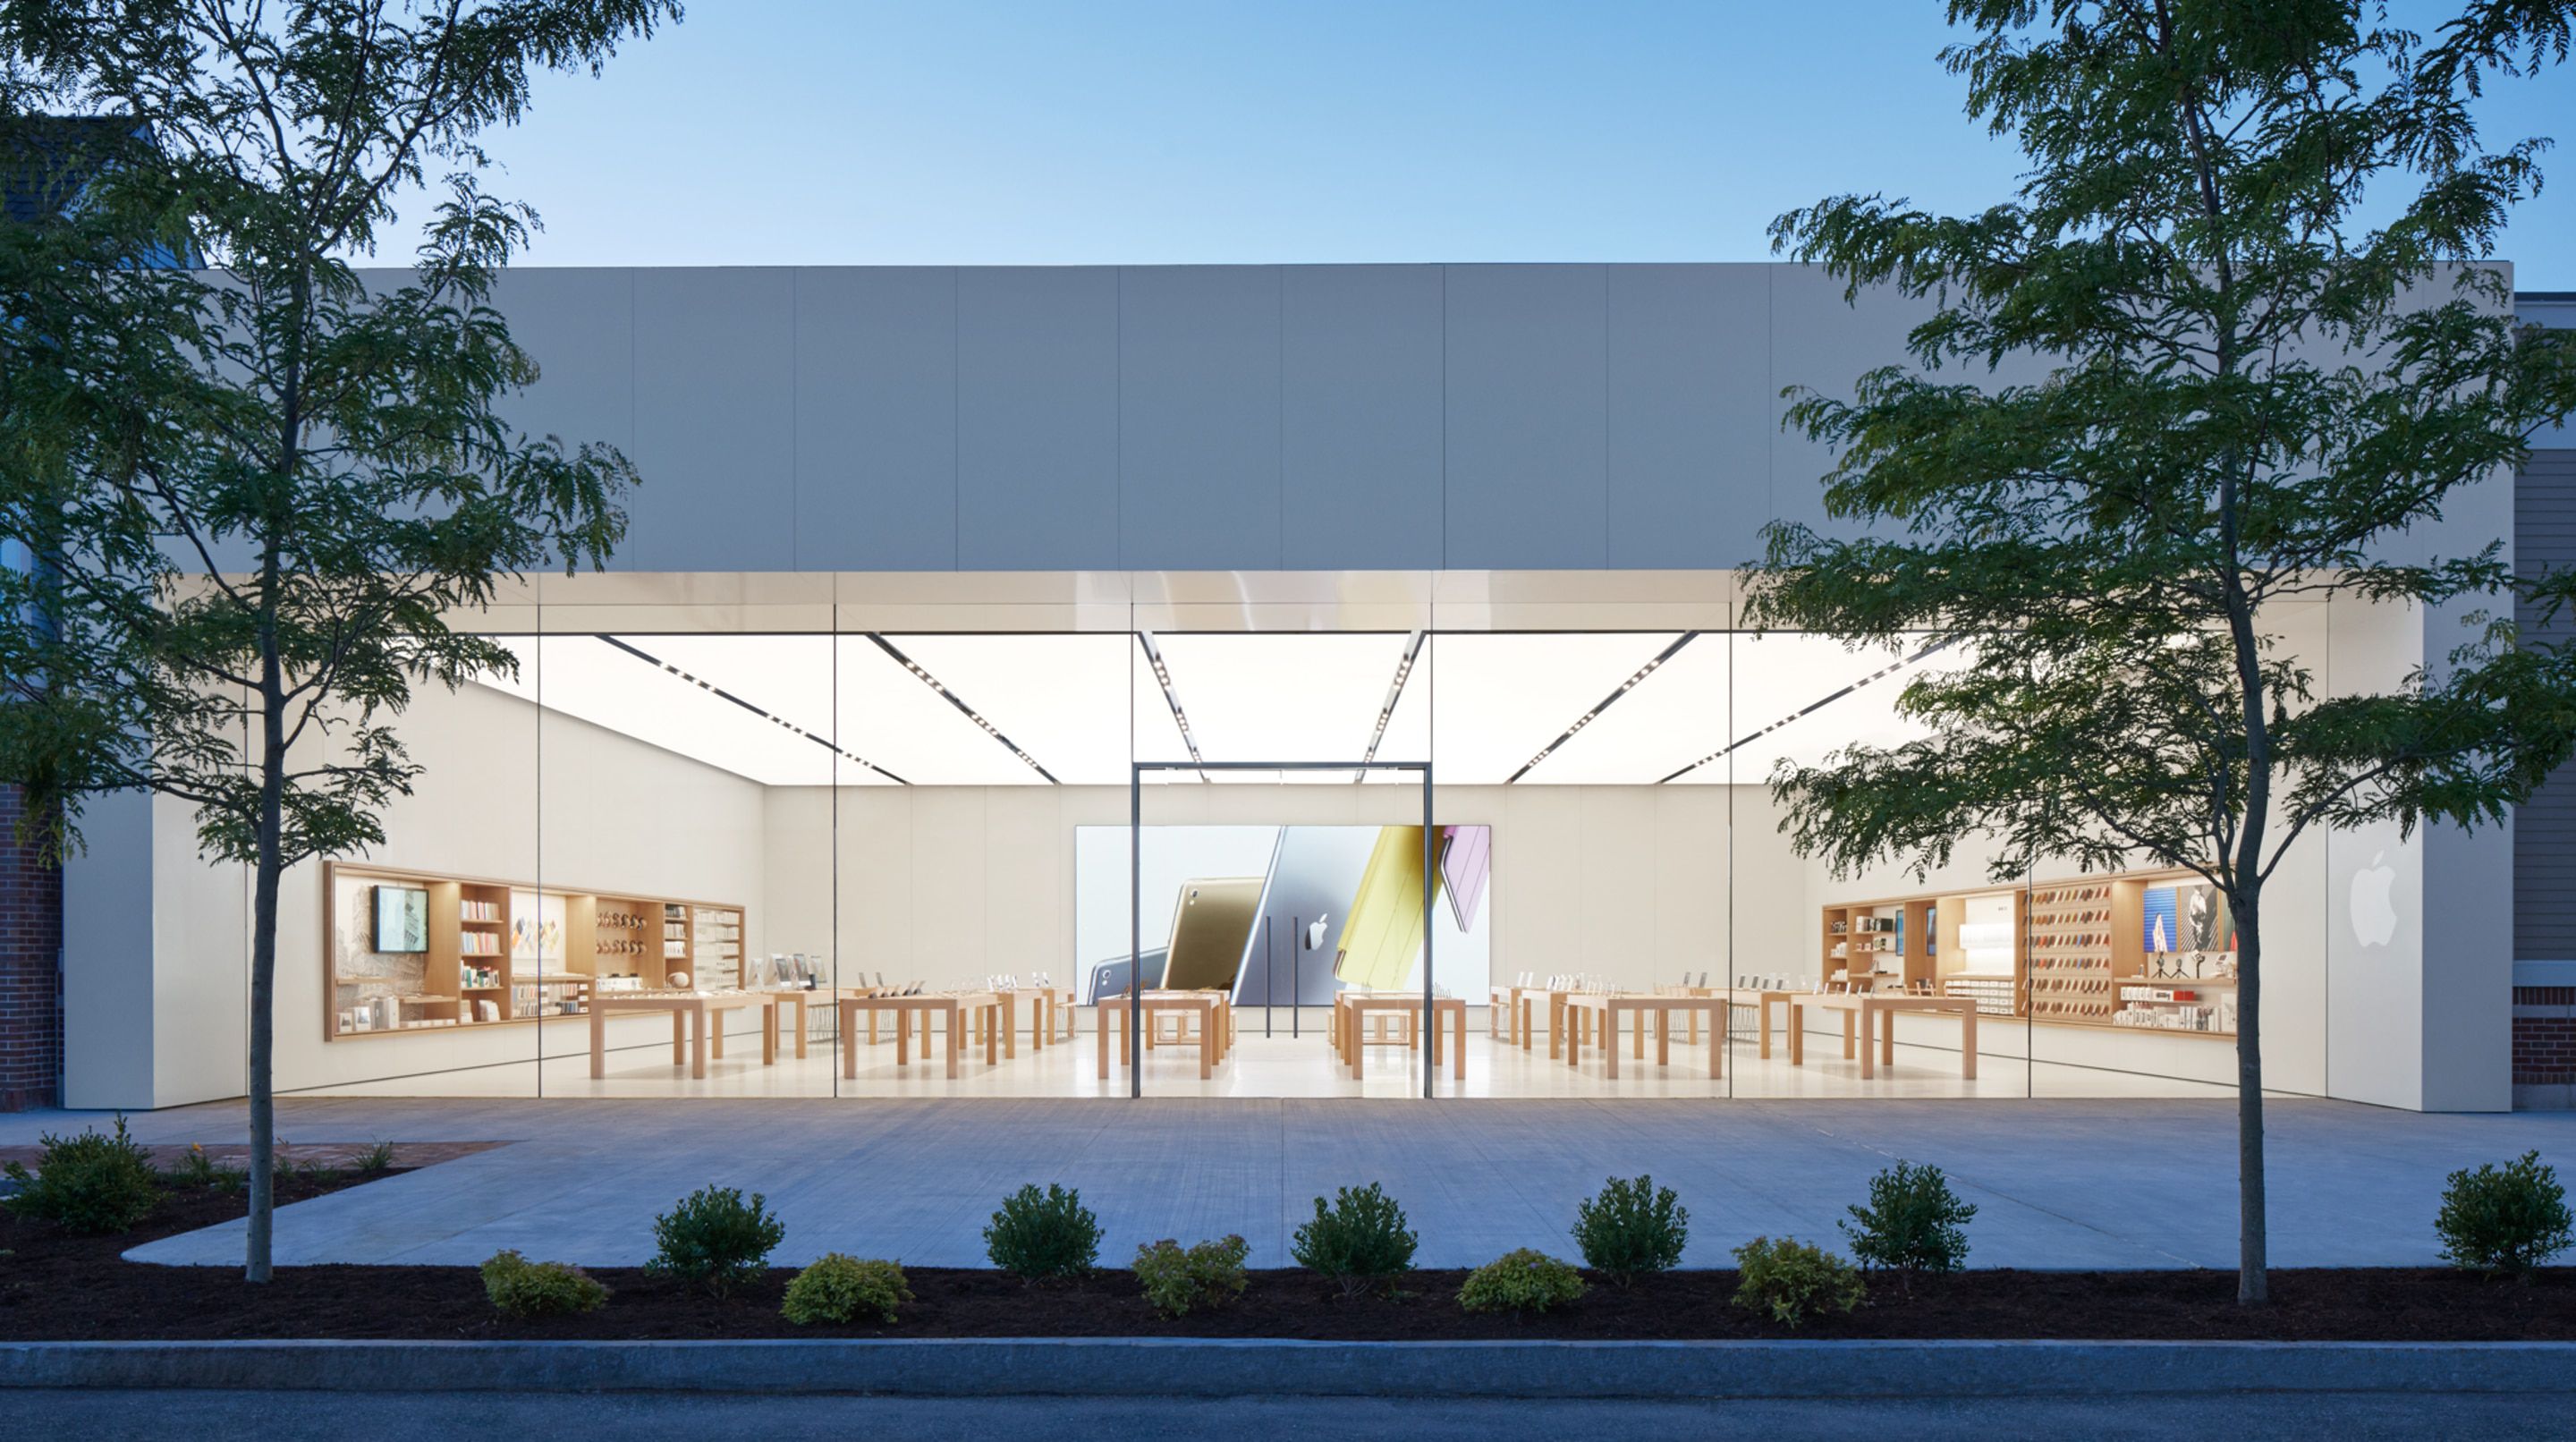 Apple Store in Greater Boston Area Struck by Vehicle, Multiple Injuries Reported - macrumors.com